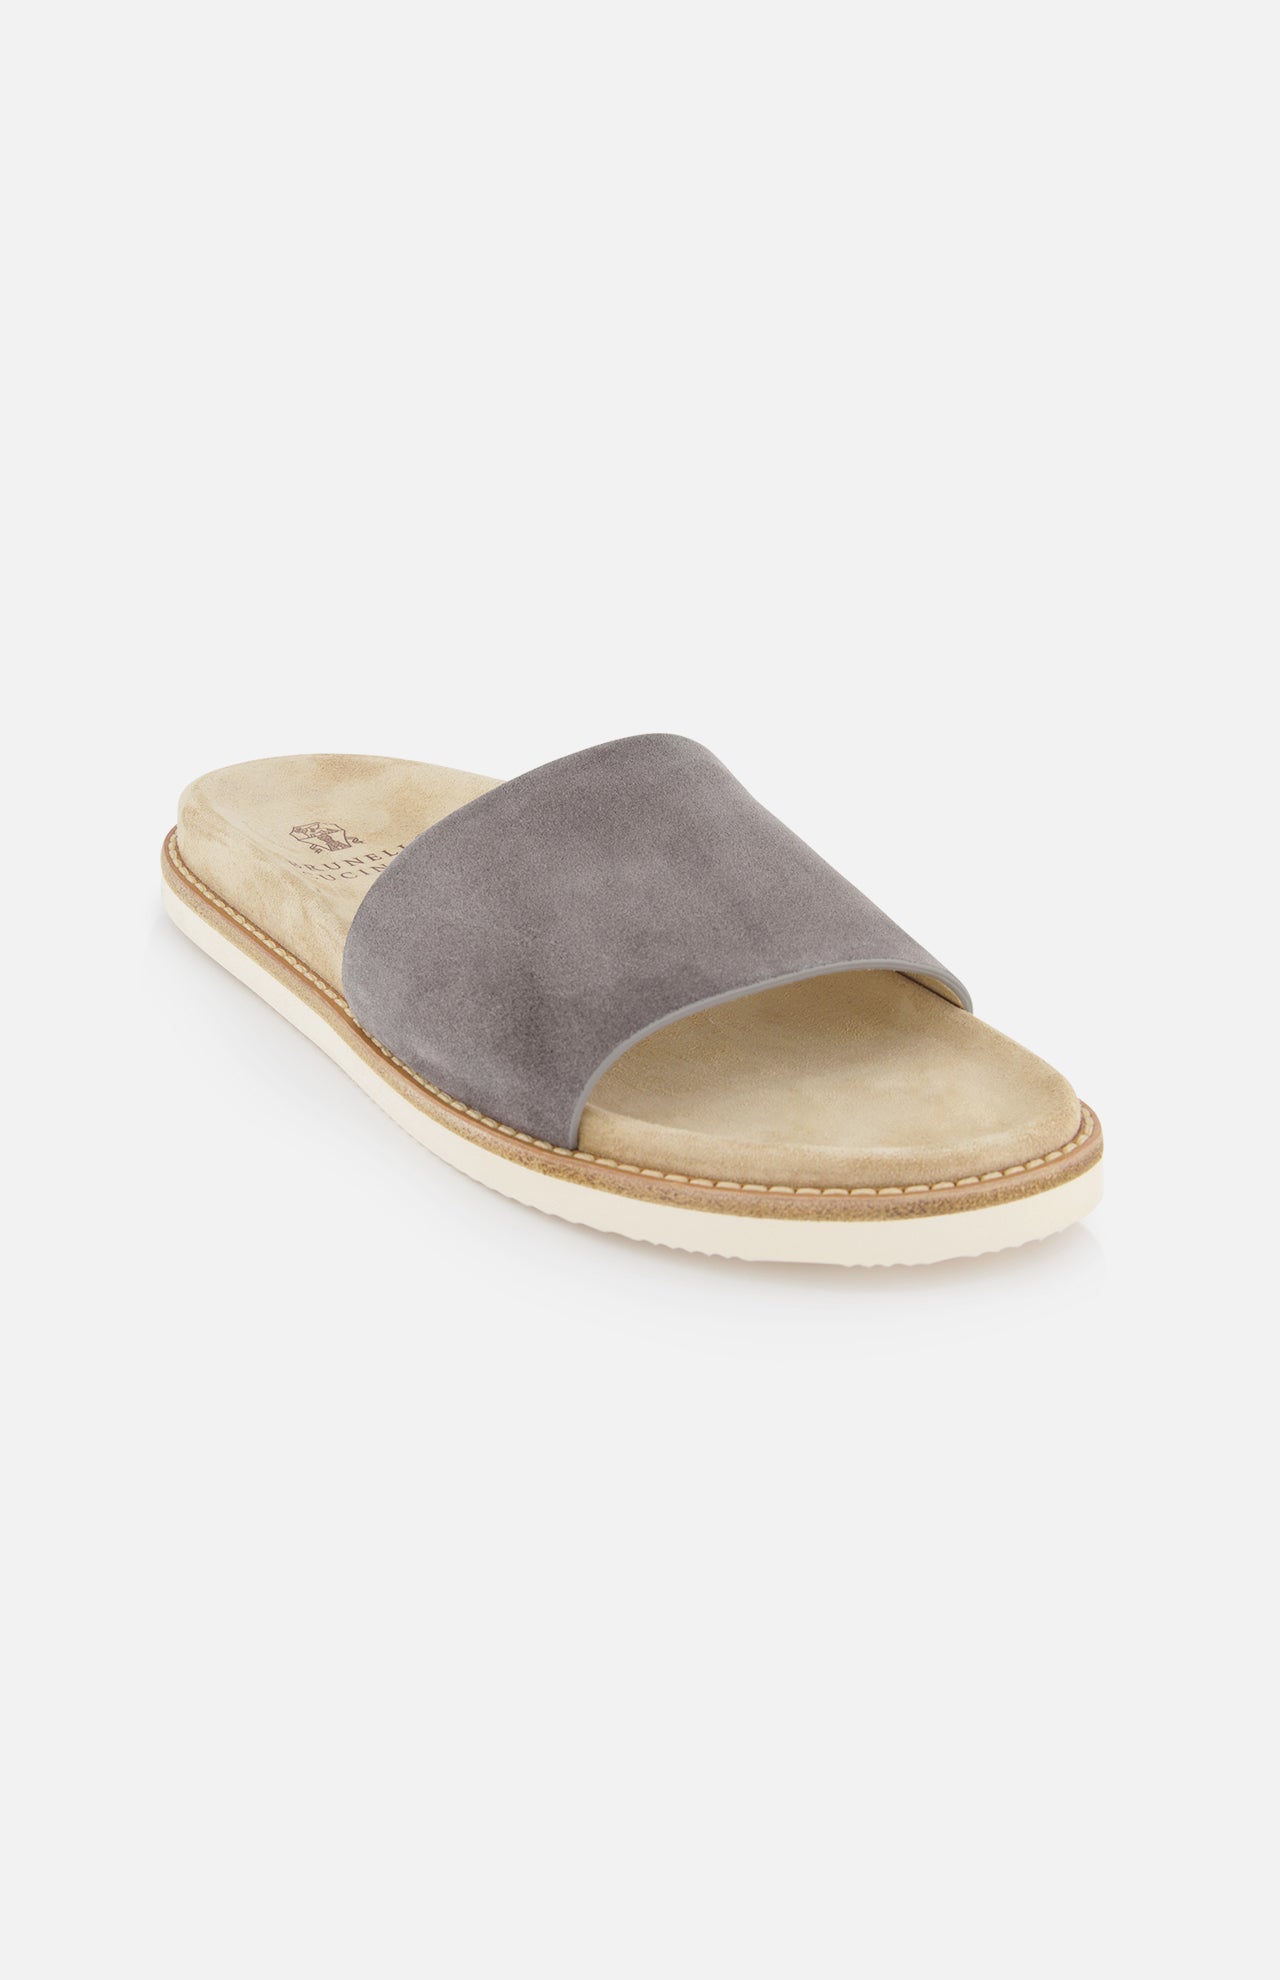 Slippers (7366529319027)